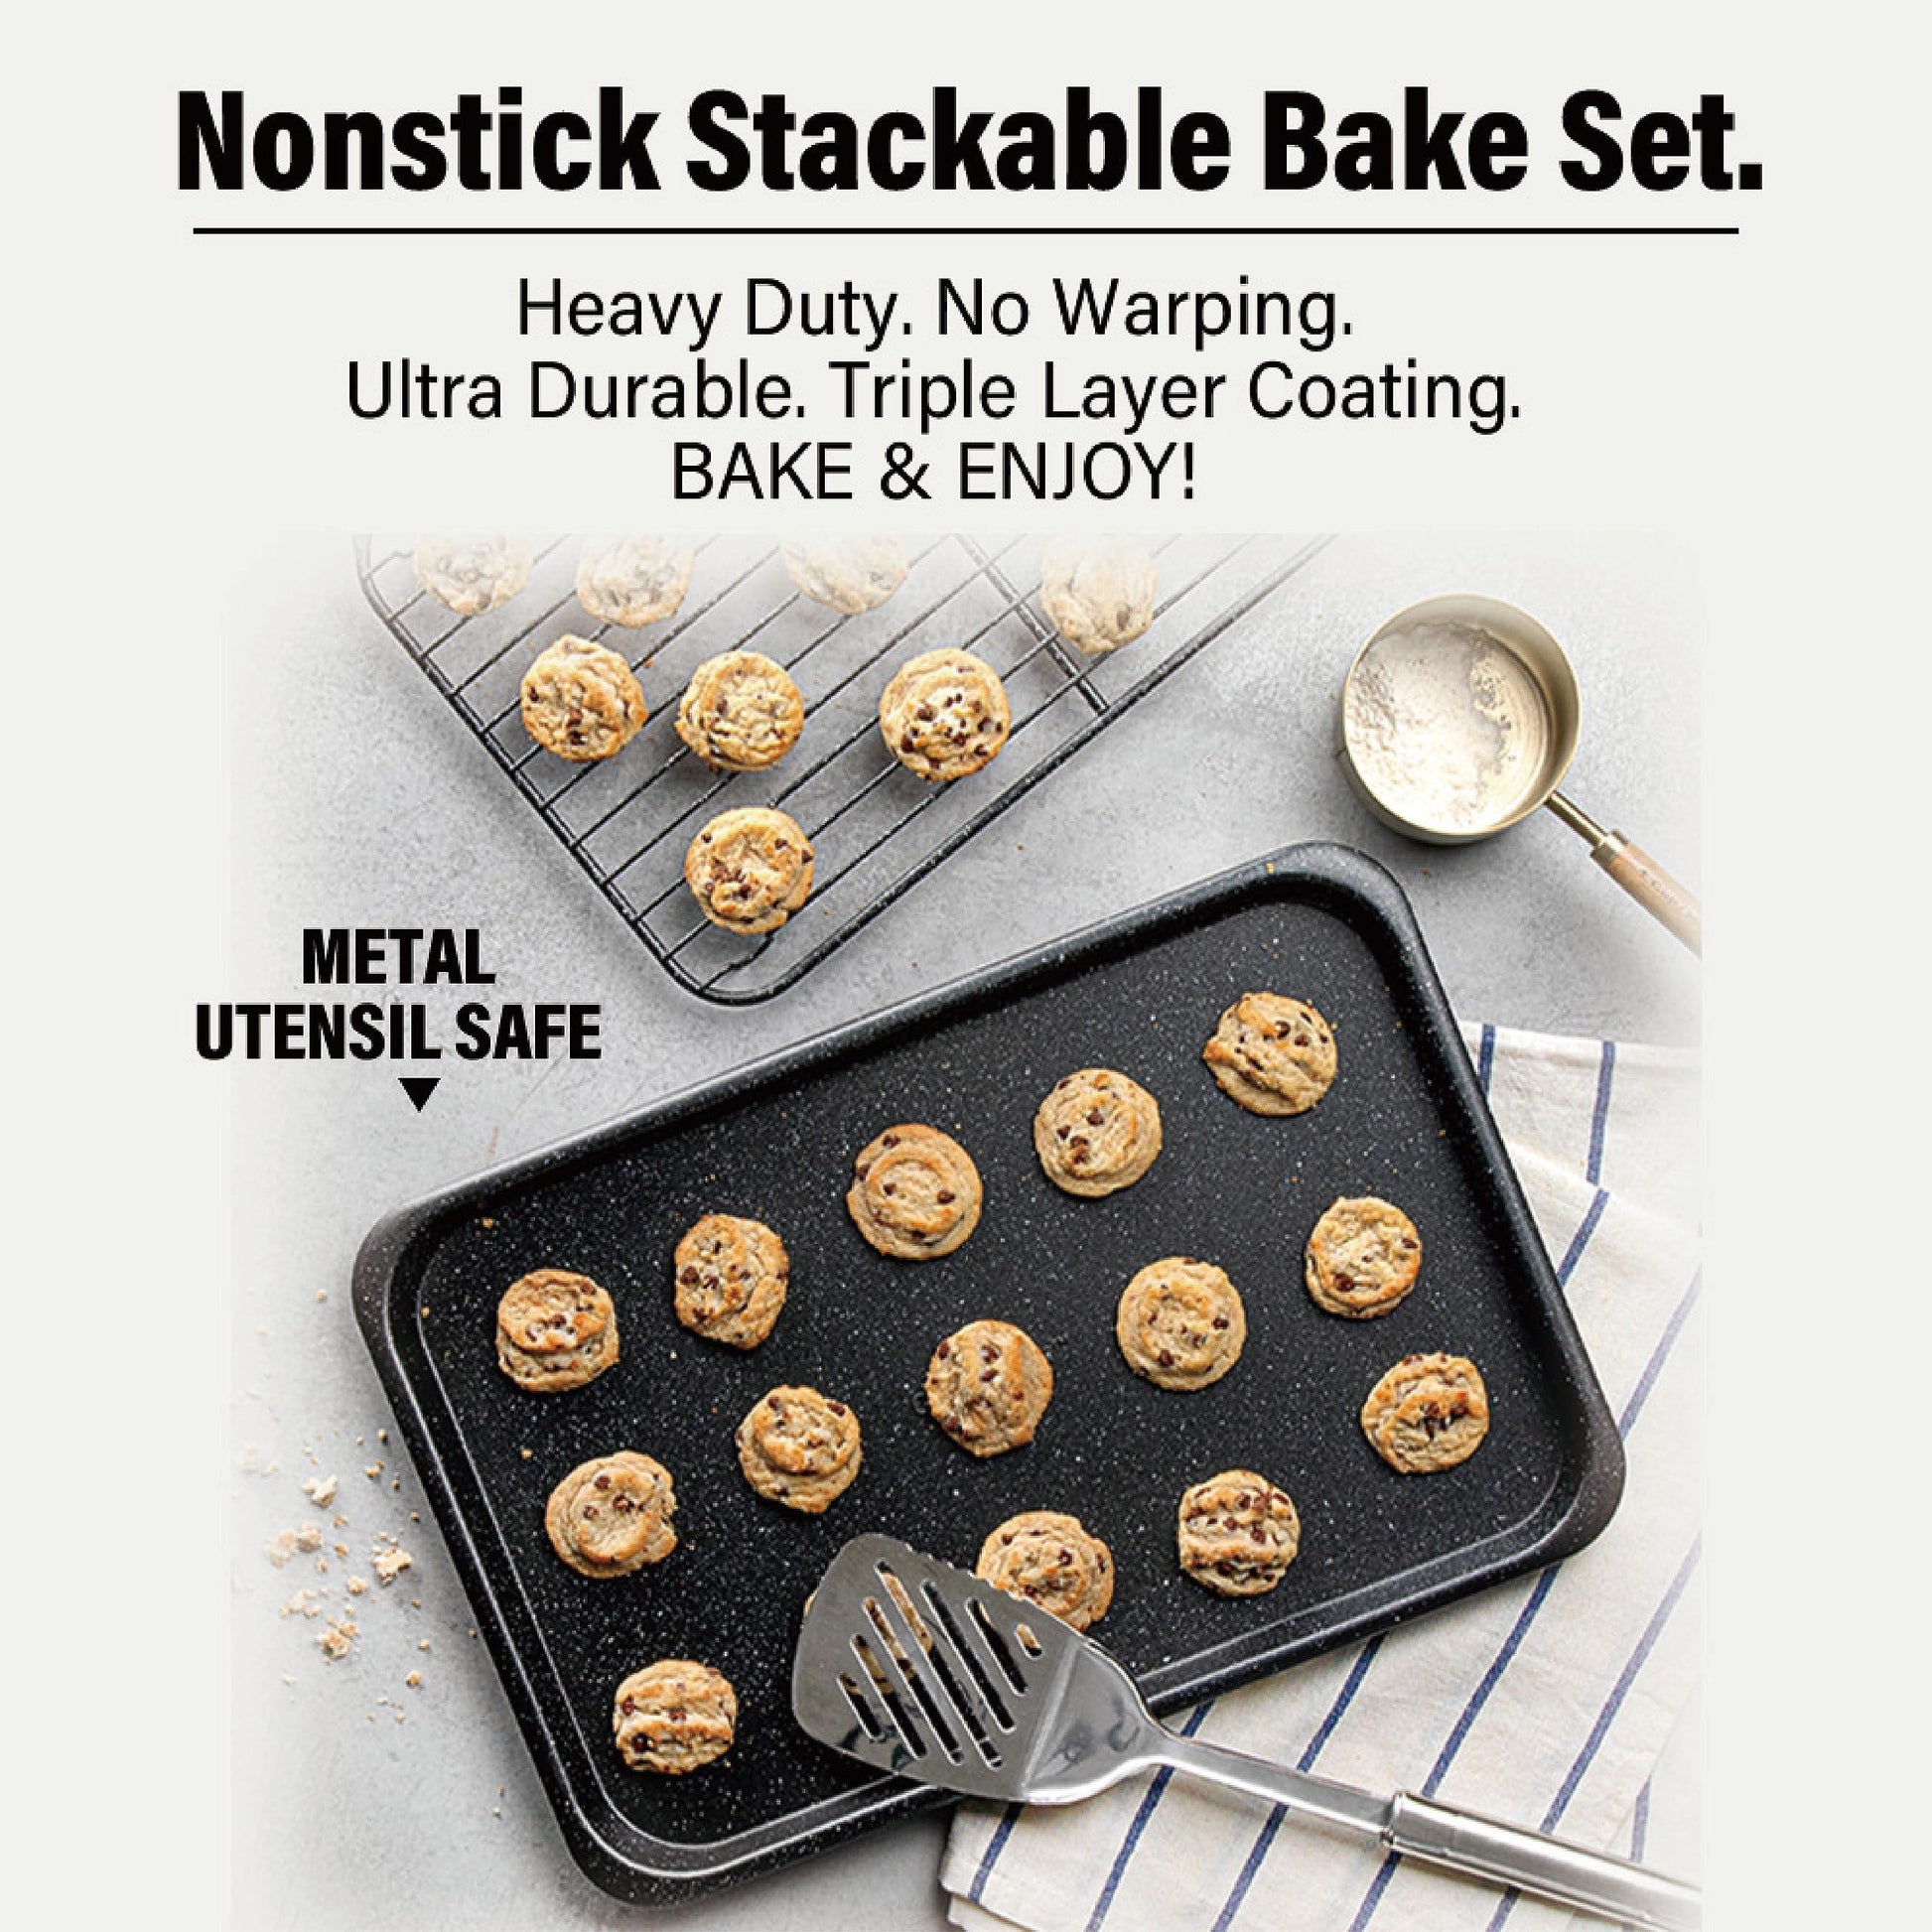 Granitestone Black 6 Pc Stackable Nonstick Bakeware Set With Oven Pans, Baking Sheet, Wire Rack - Complete Kitchen Baking Set, Oven/Dishwasher Safe, 100% Non Toxic - CookCave